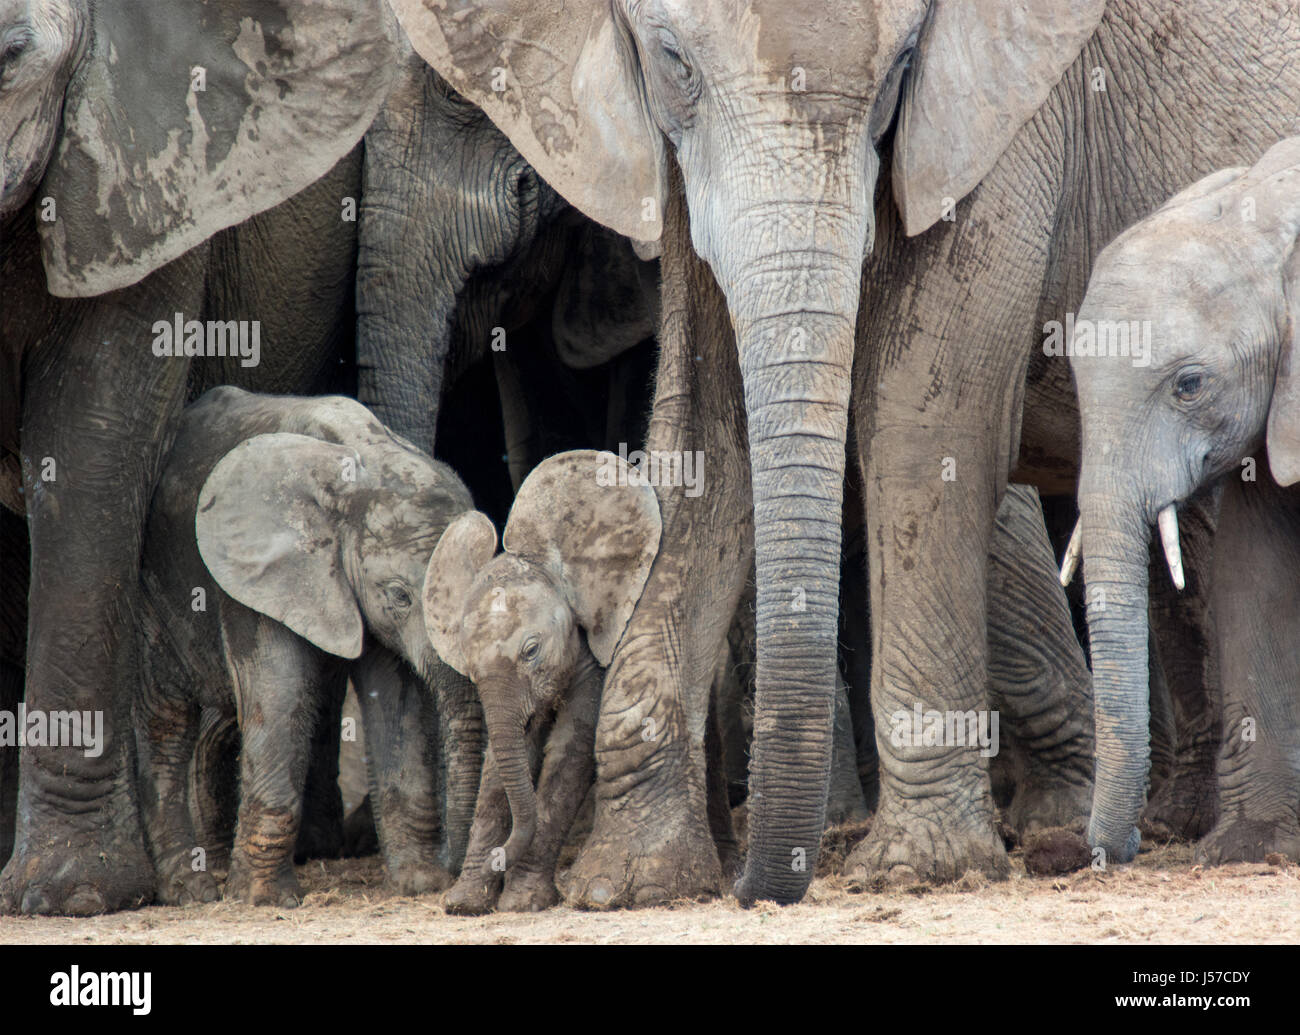 Trio of Elephants and Trunks Stock Photo